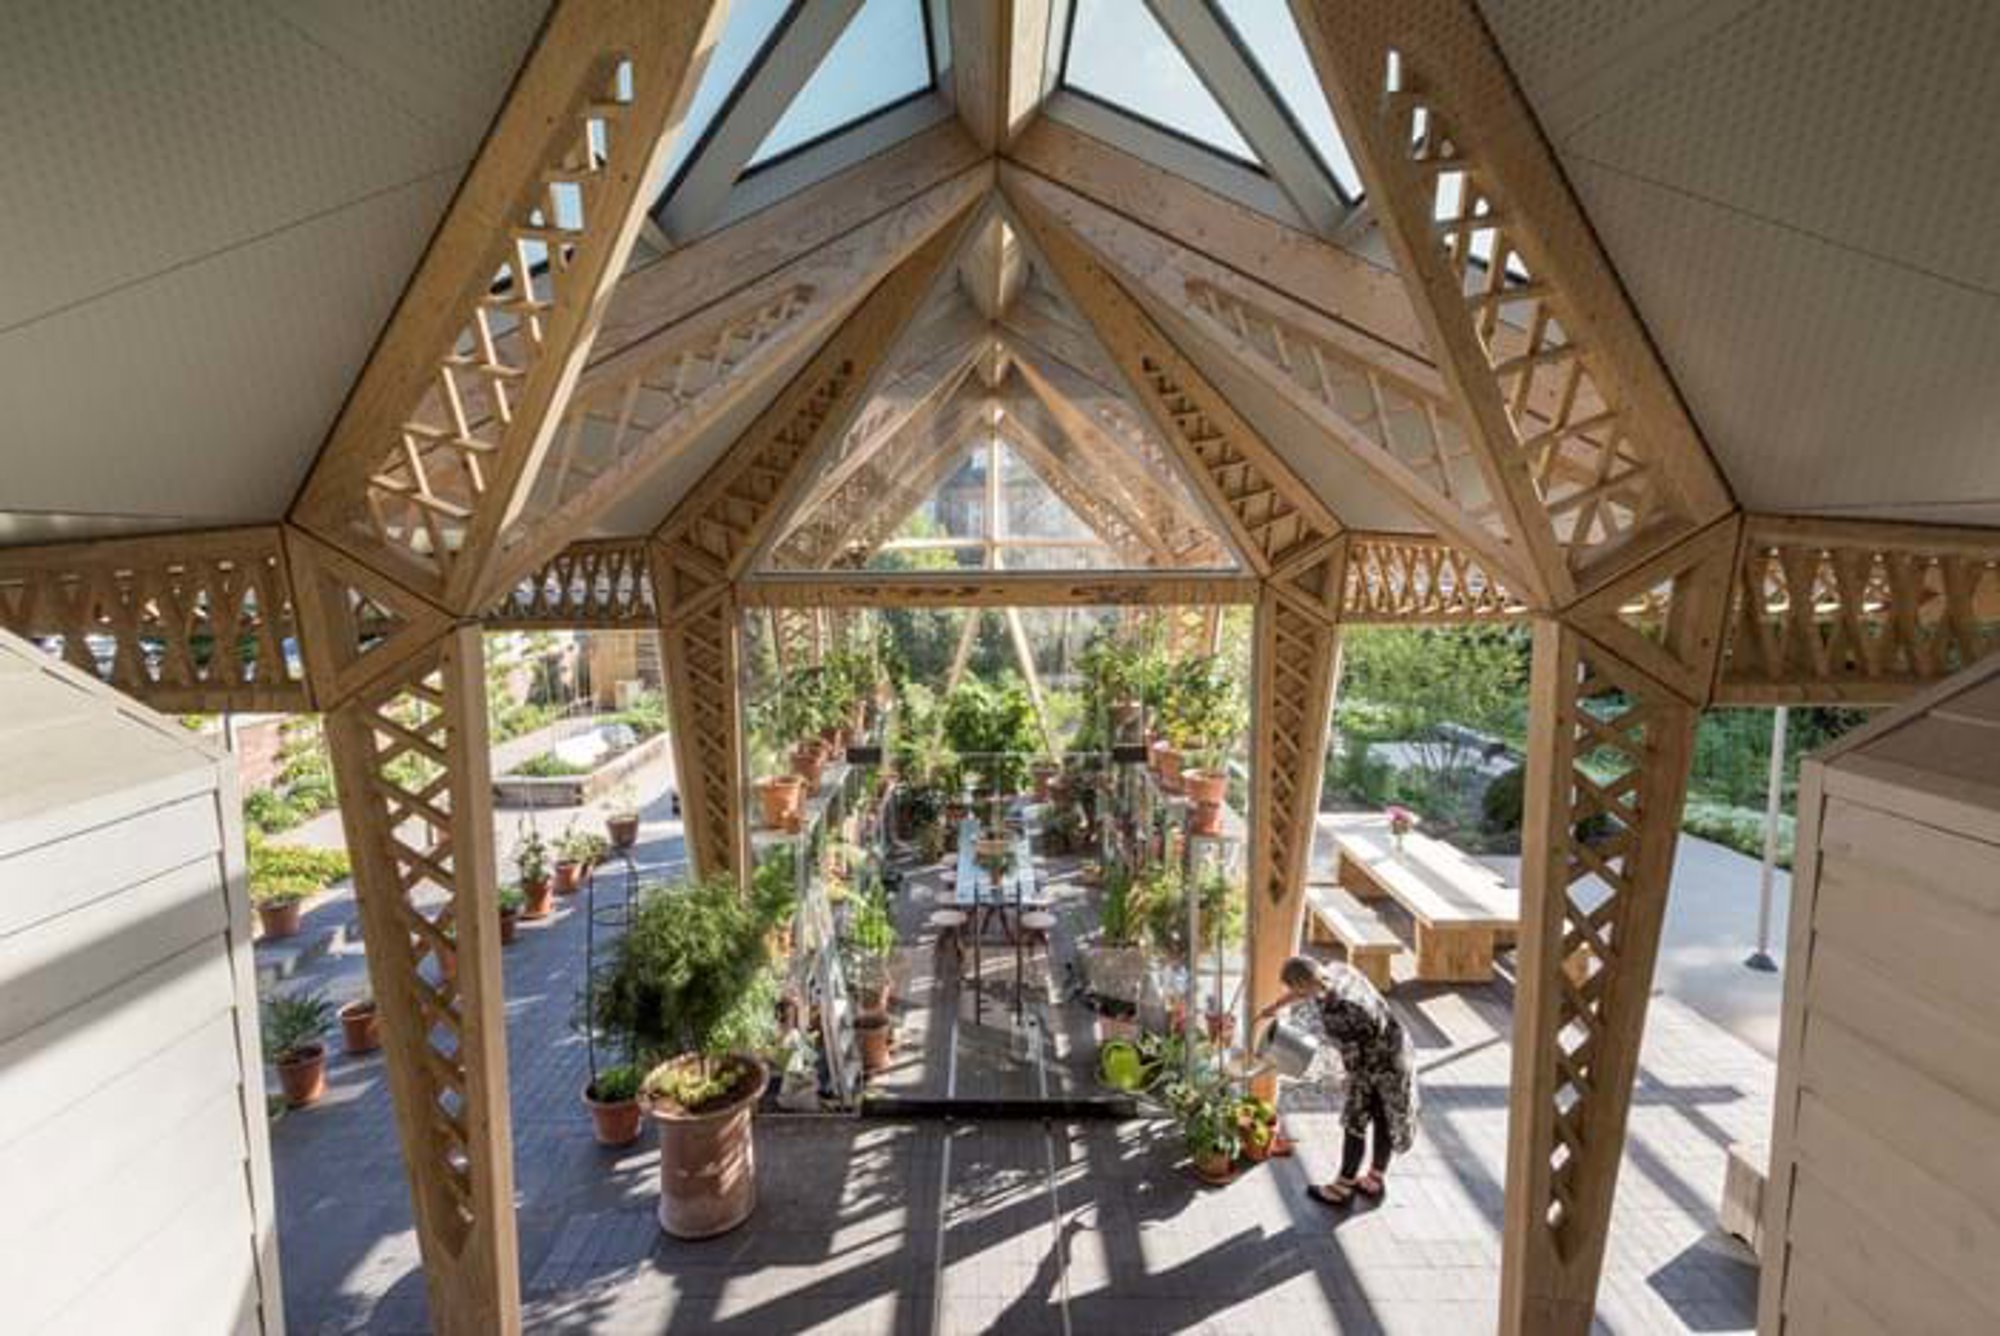 The all-glazed greenhouse blends interior with exterior, and acts as both a congenial seating area, workstation and potting shed. © Nigel Young / Foster + Partners
